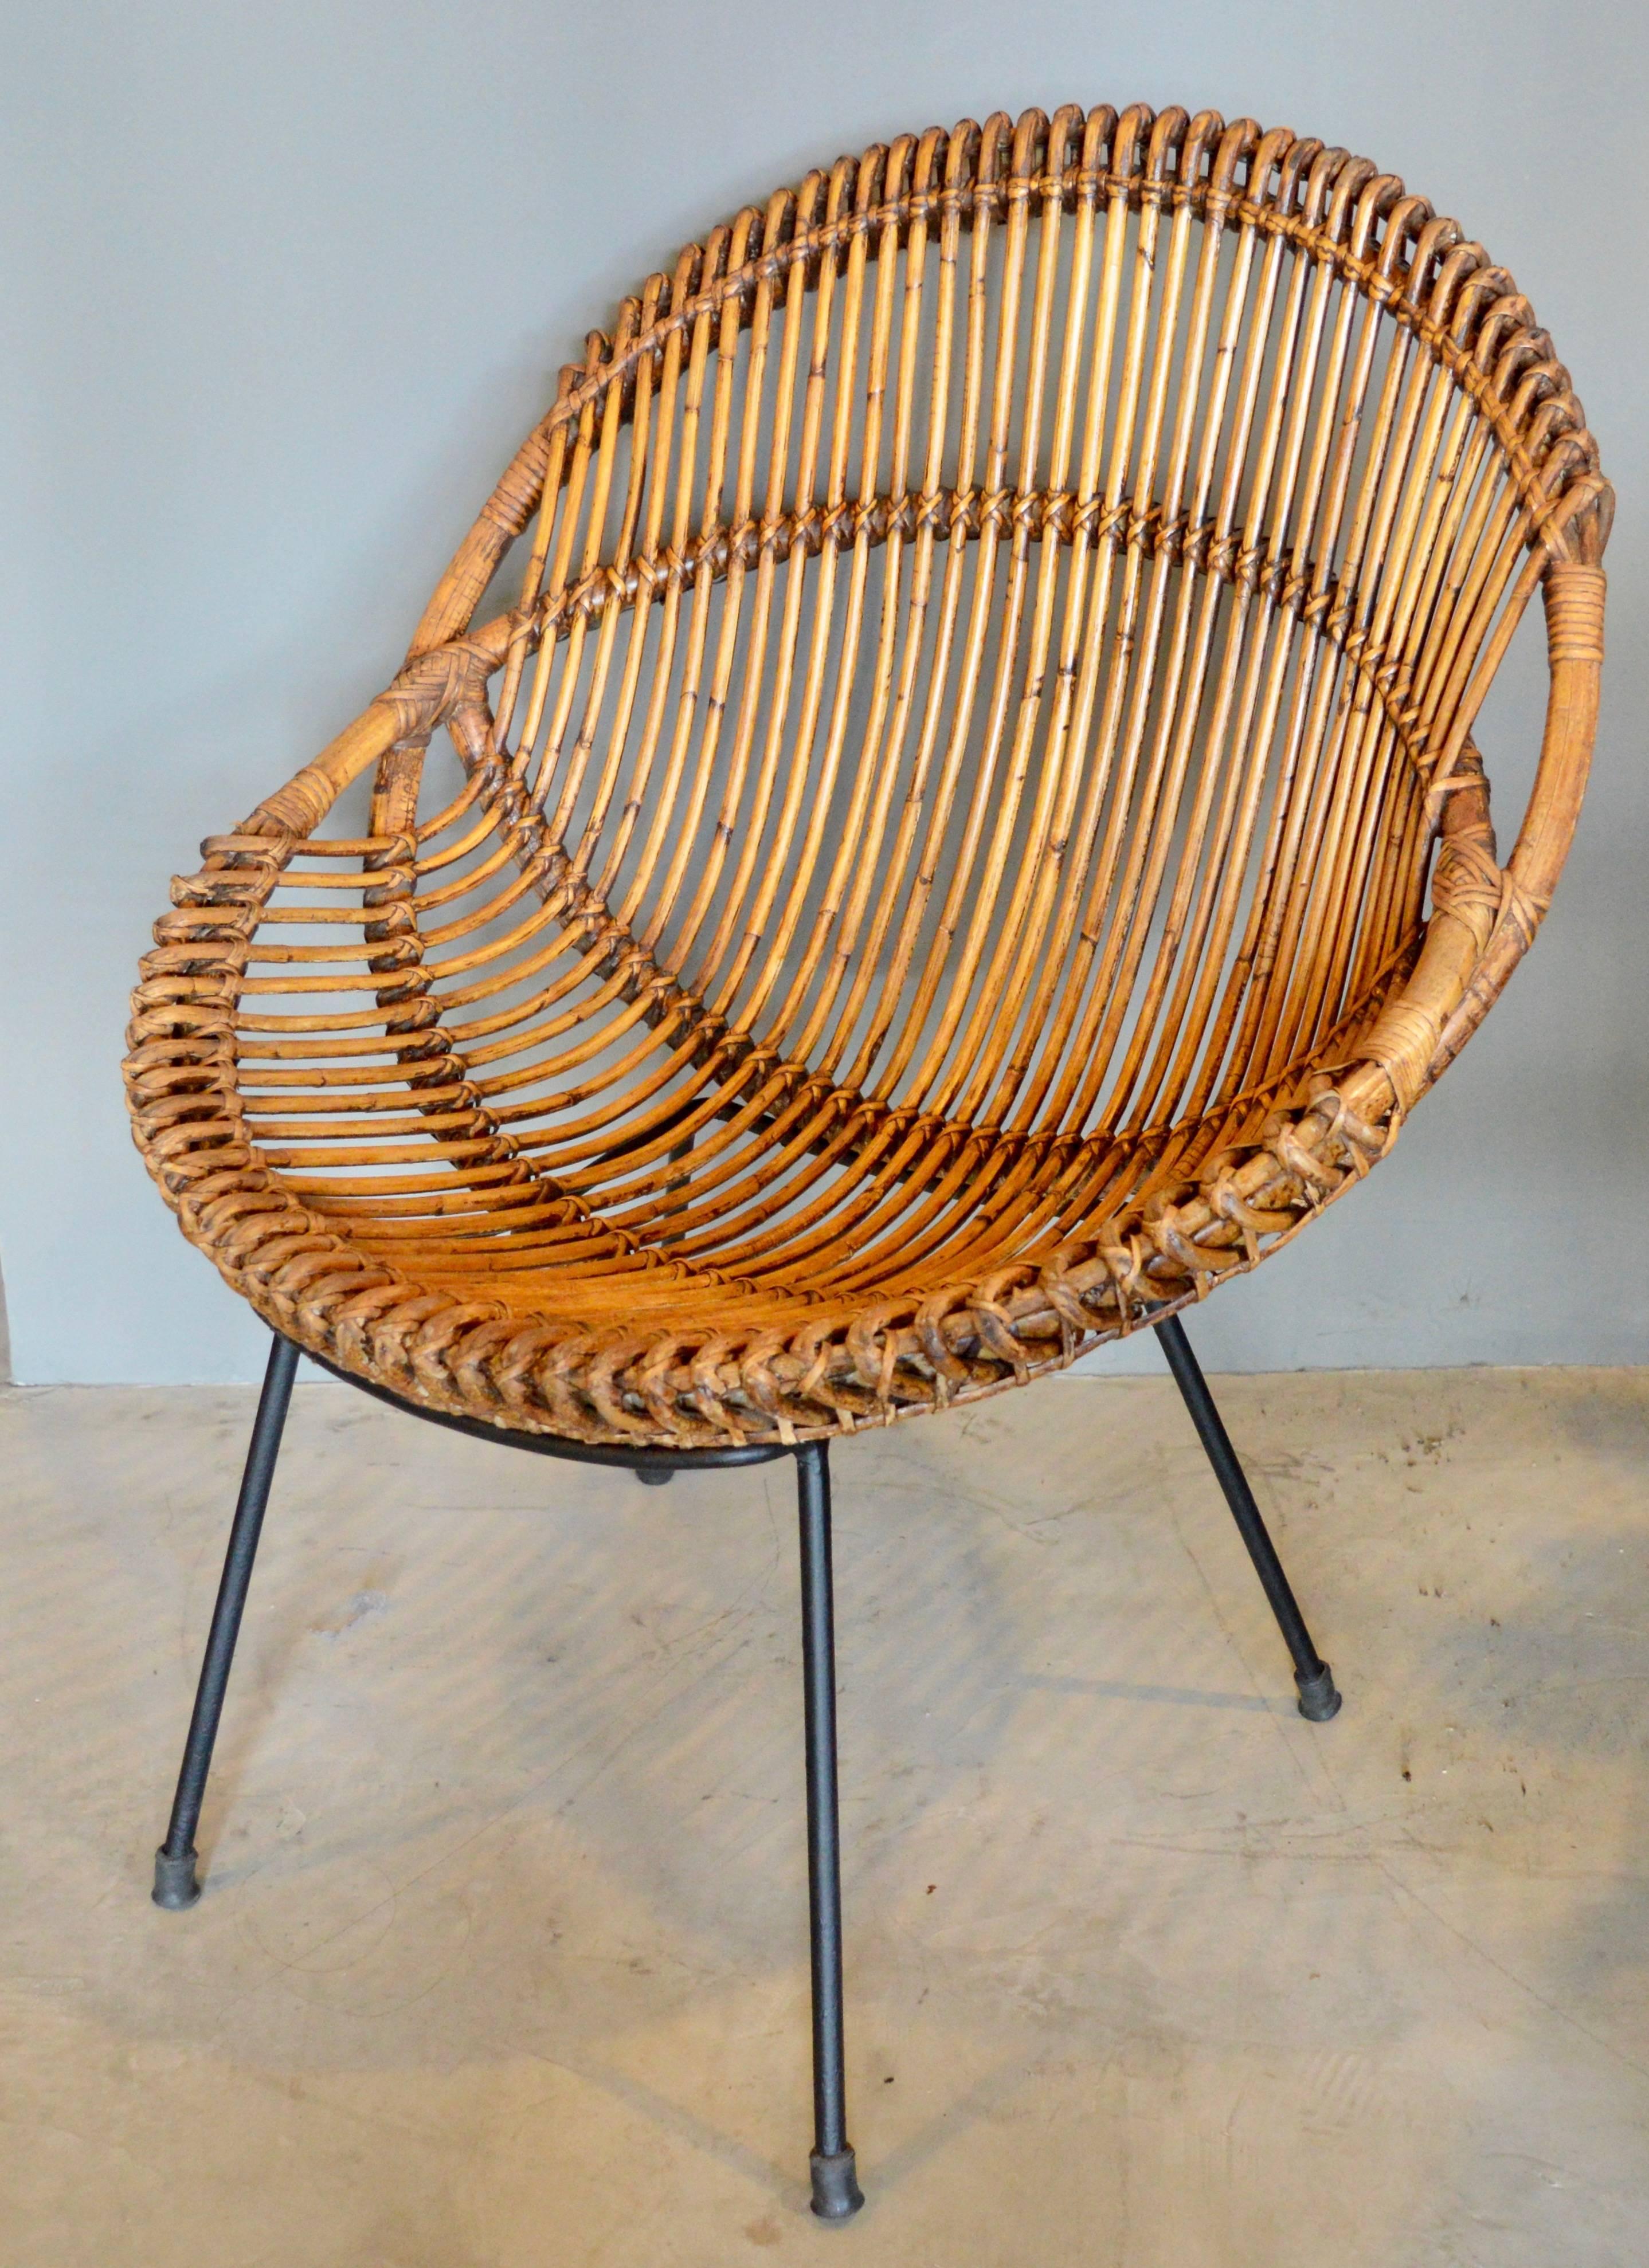 Fantastic French rattan, bamboo and iron scoop chair. Great patina and age to rattan. Chairs in excellent vintage condition. Perfect for indoors or outside.